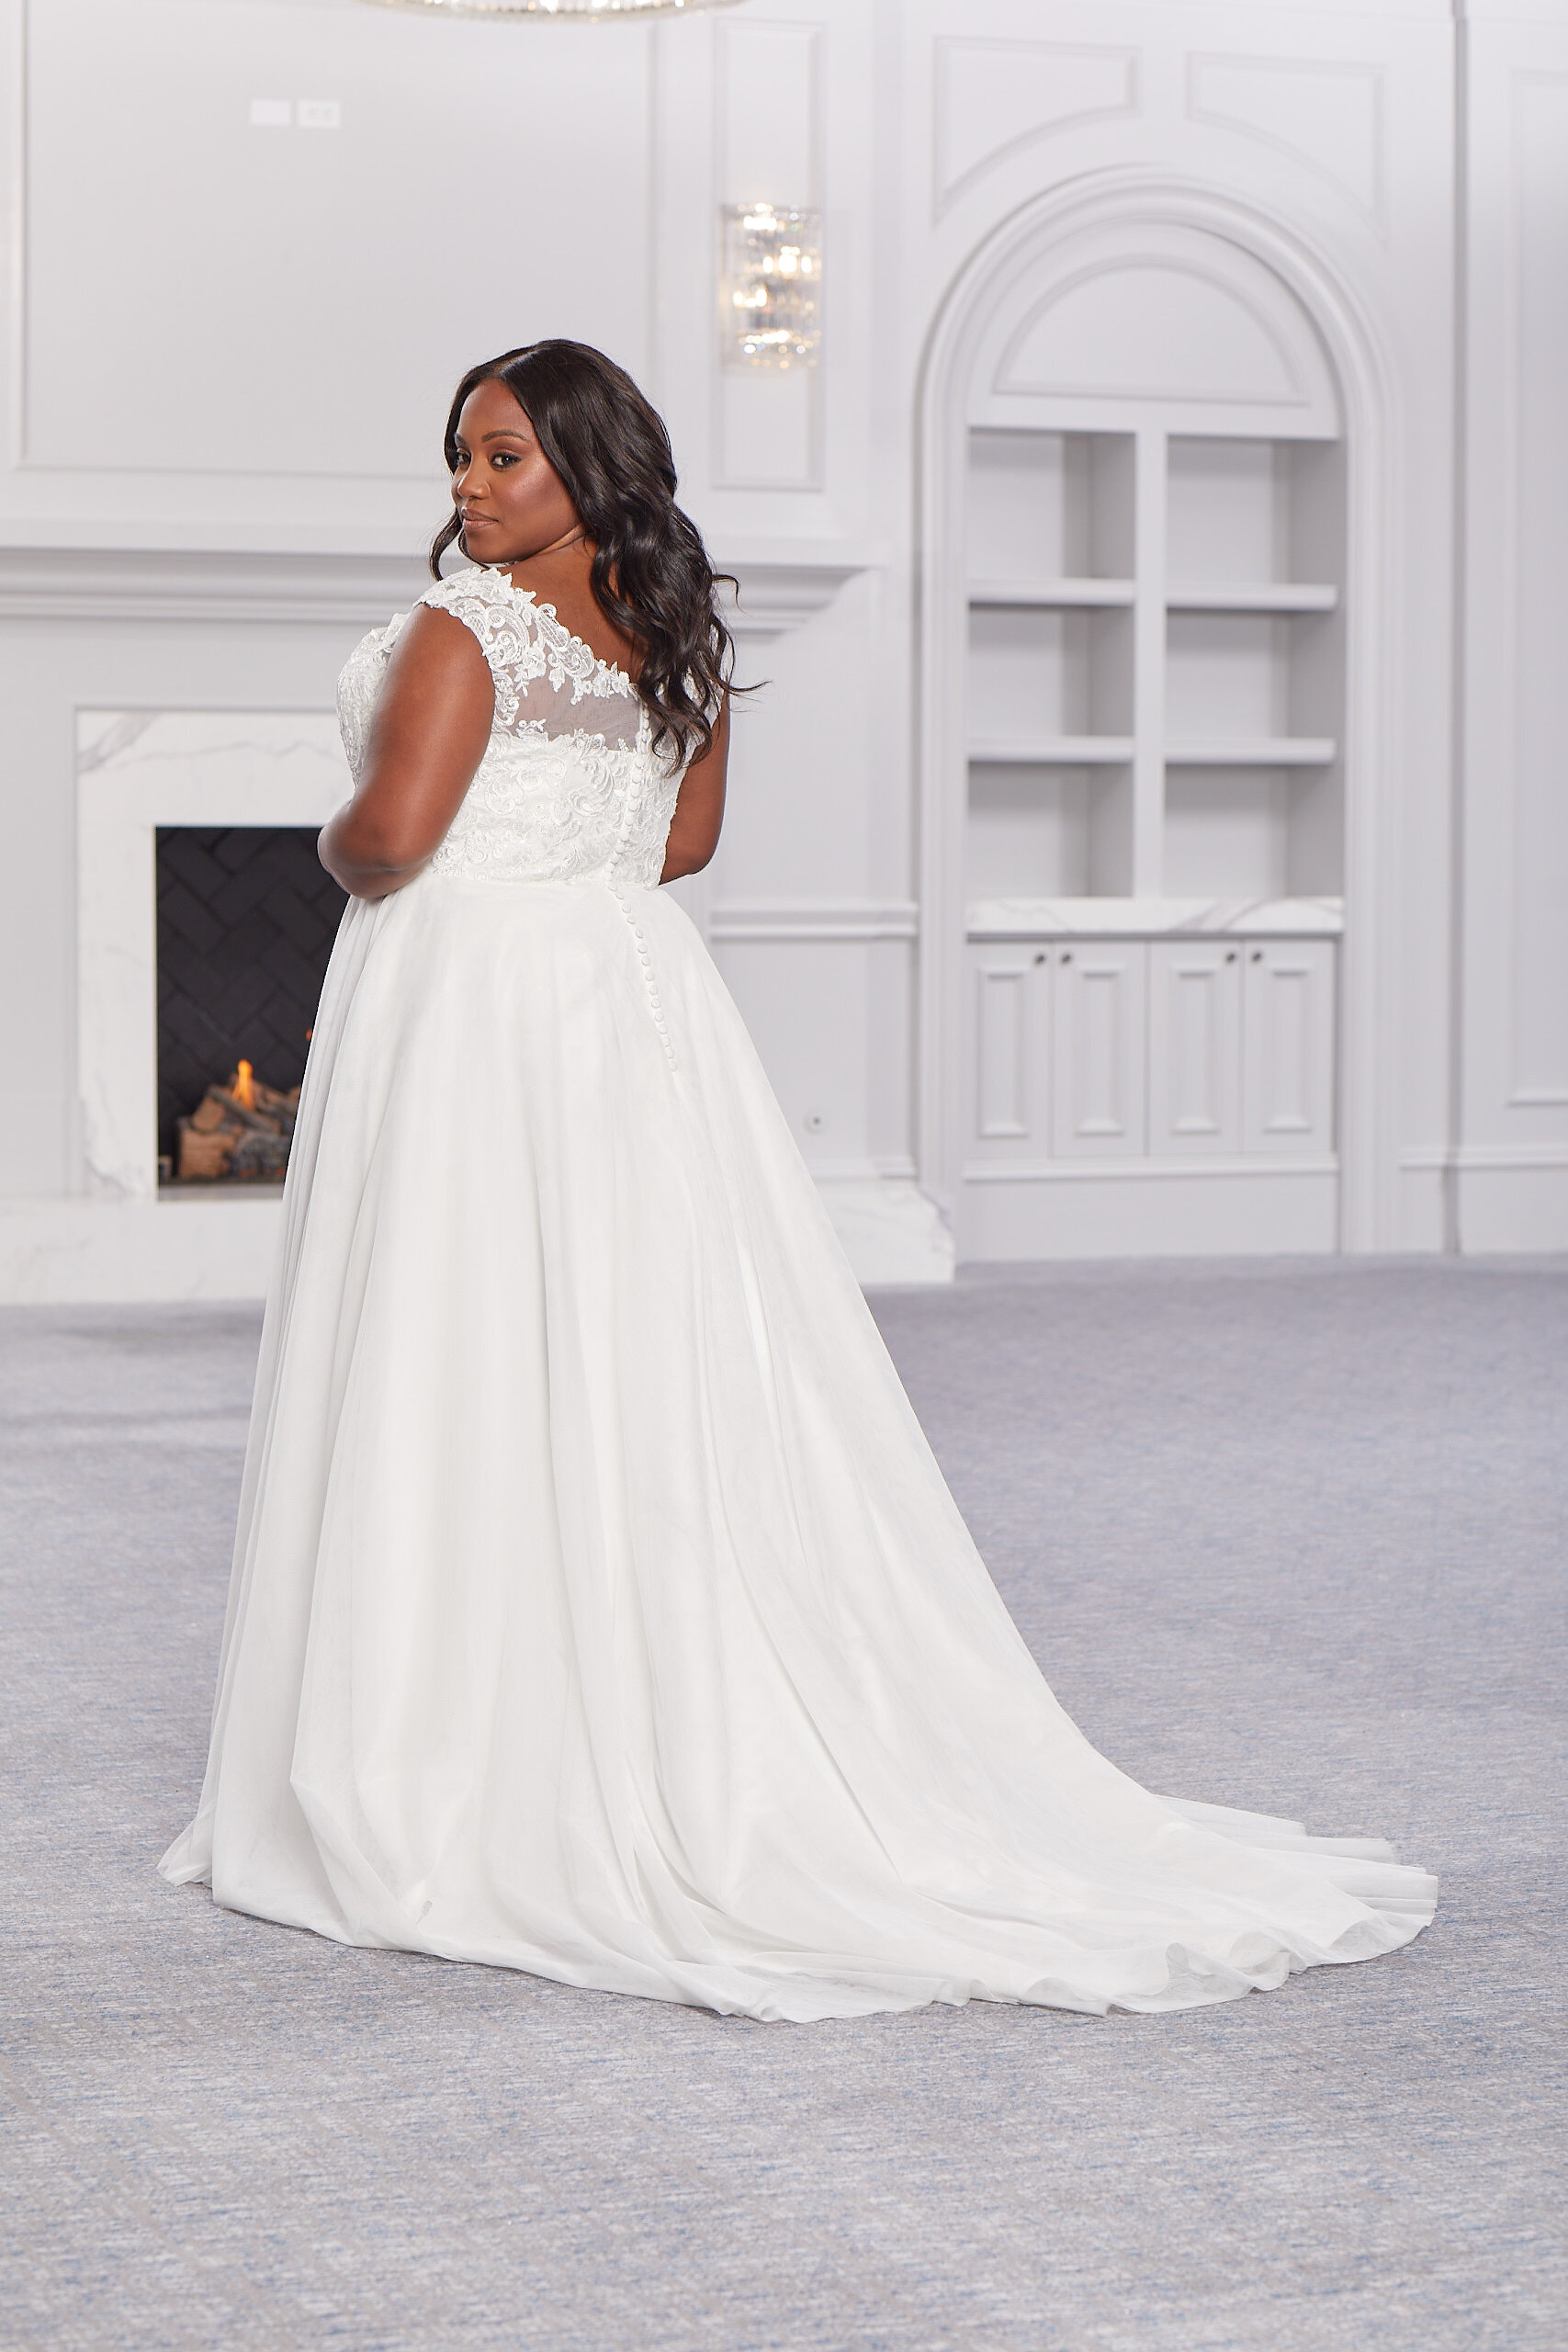 Brides-by-Young-Plus-Size-Bridal-Curvy-Wedding-Dress-New-Jersey-Indiana-Chicago-Illinois-ARIEL_1709.jpg